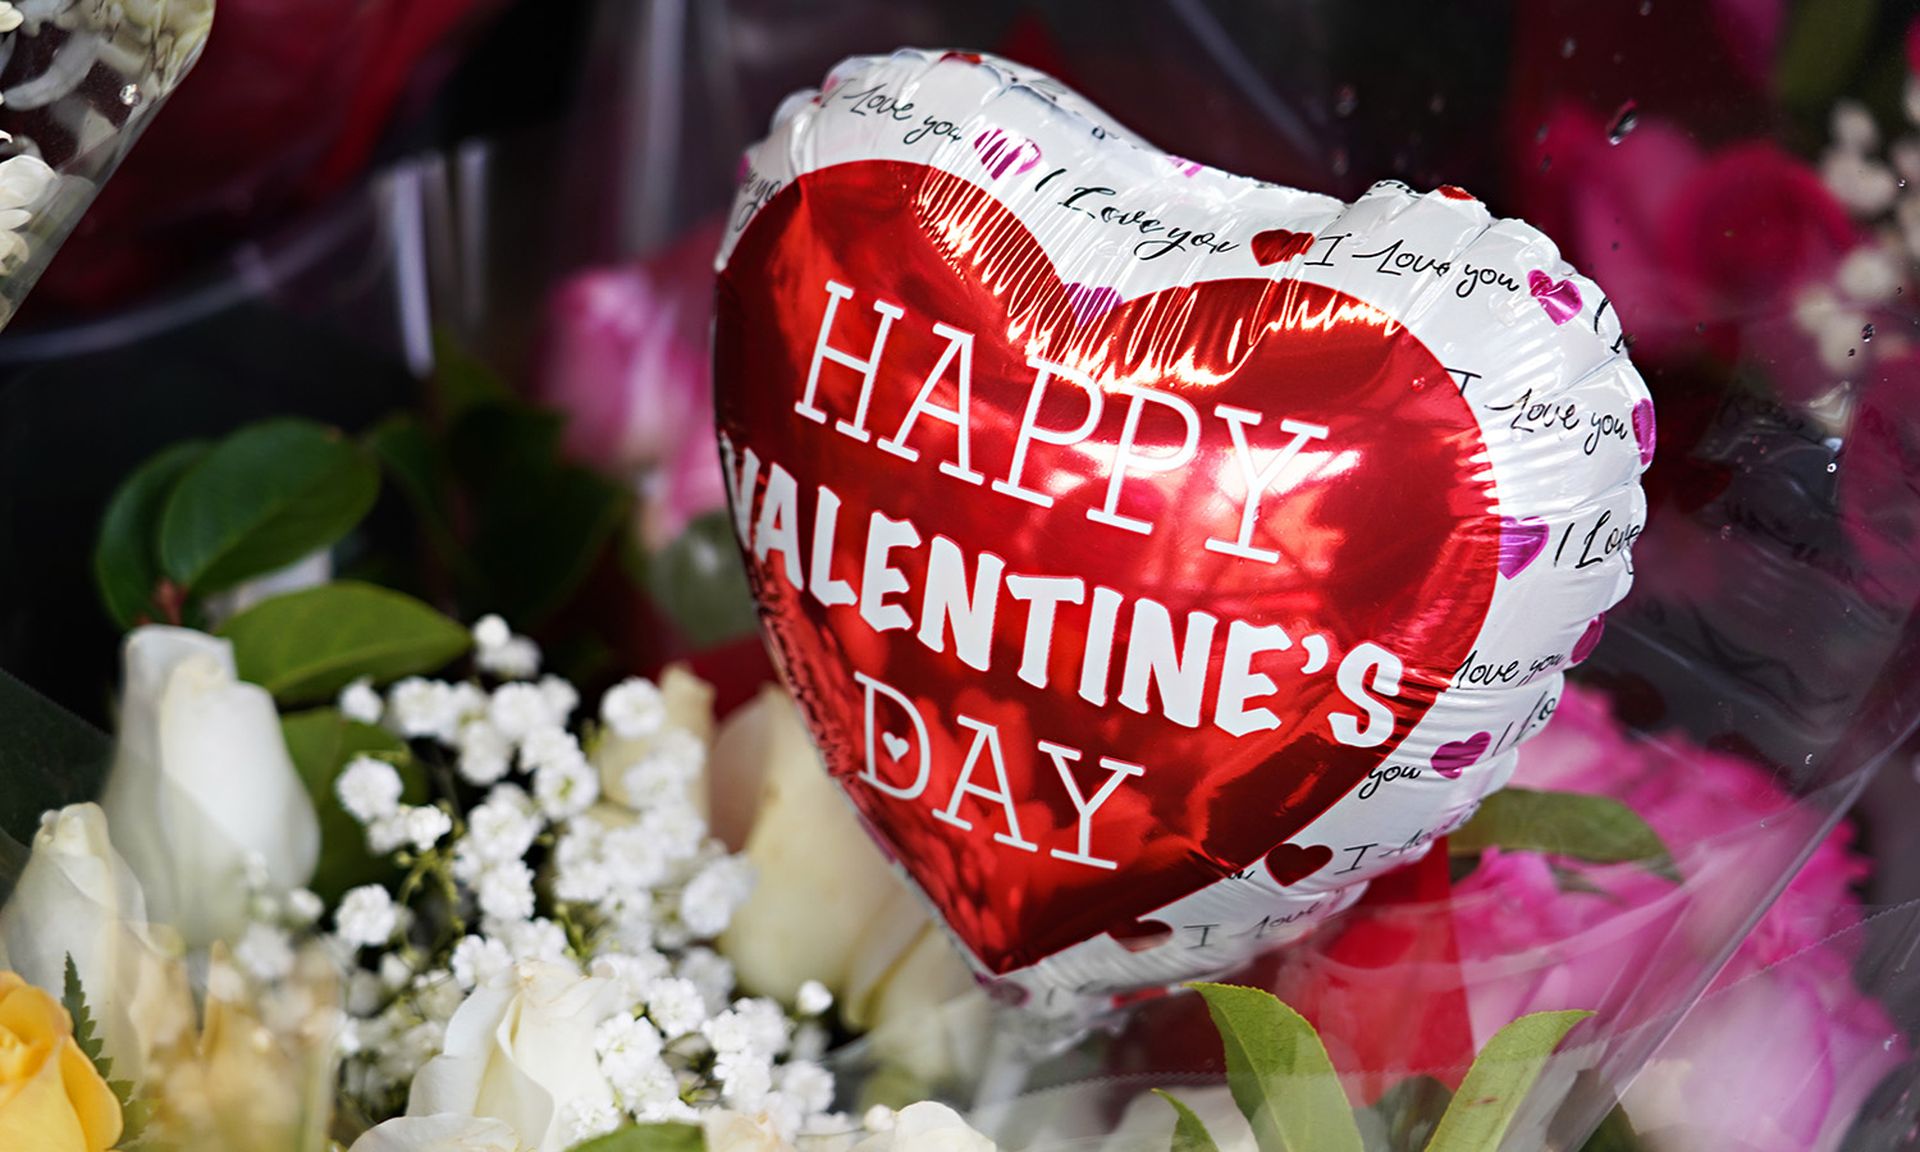 Researchers reported that customers of UnionBank of the Philippines were targeted by an SMS phishing attack offering a Valentine&#8217;s Day gift. Pictured: Valentine&#8217;s Day balloons and flowers are sold outside a convenience store on Feb. 14, 2021, in New York City. (Photo by Cindy Ord/Getty Images)